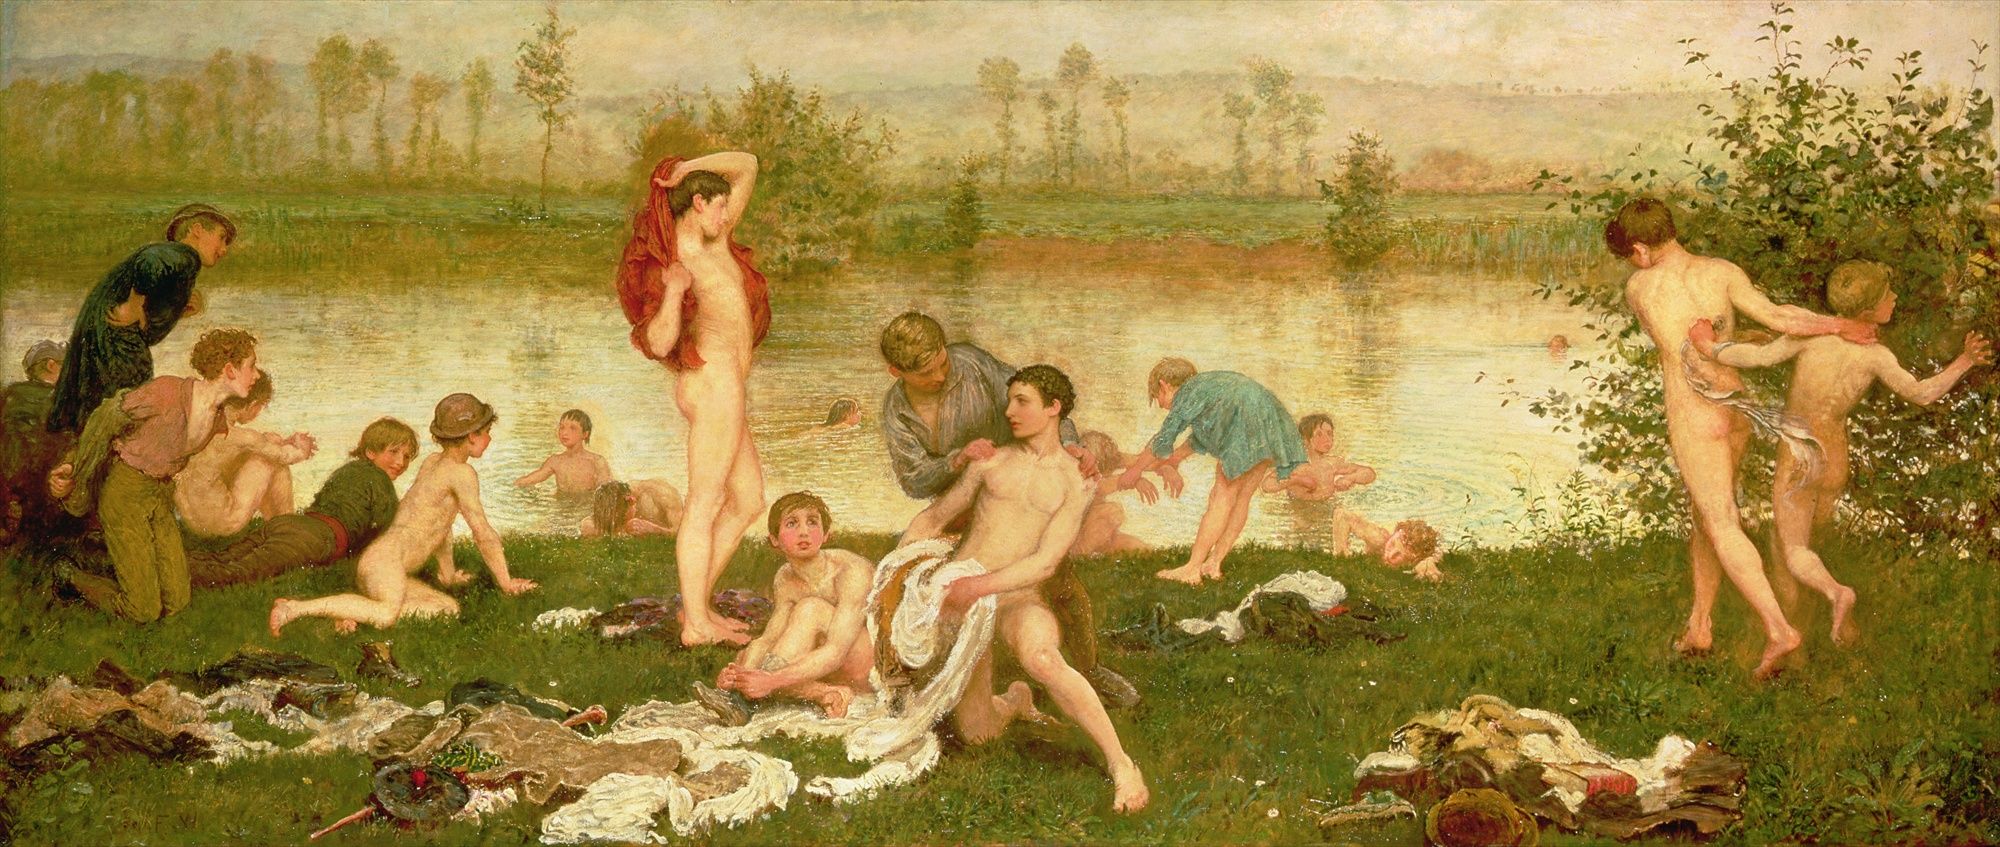 The Bathers by Frederick Walker